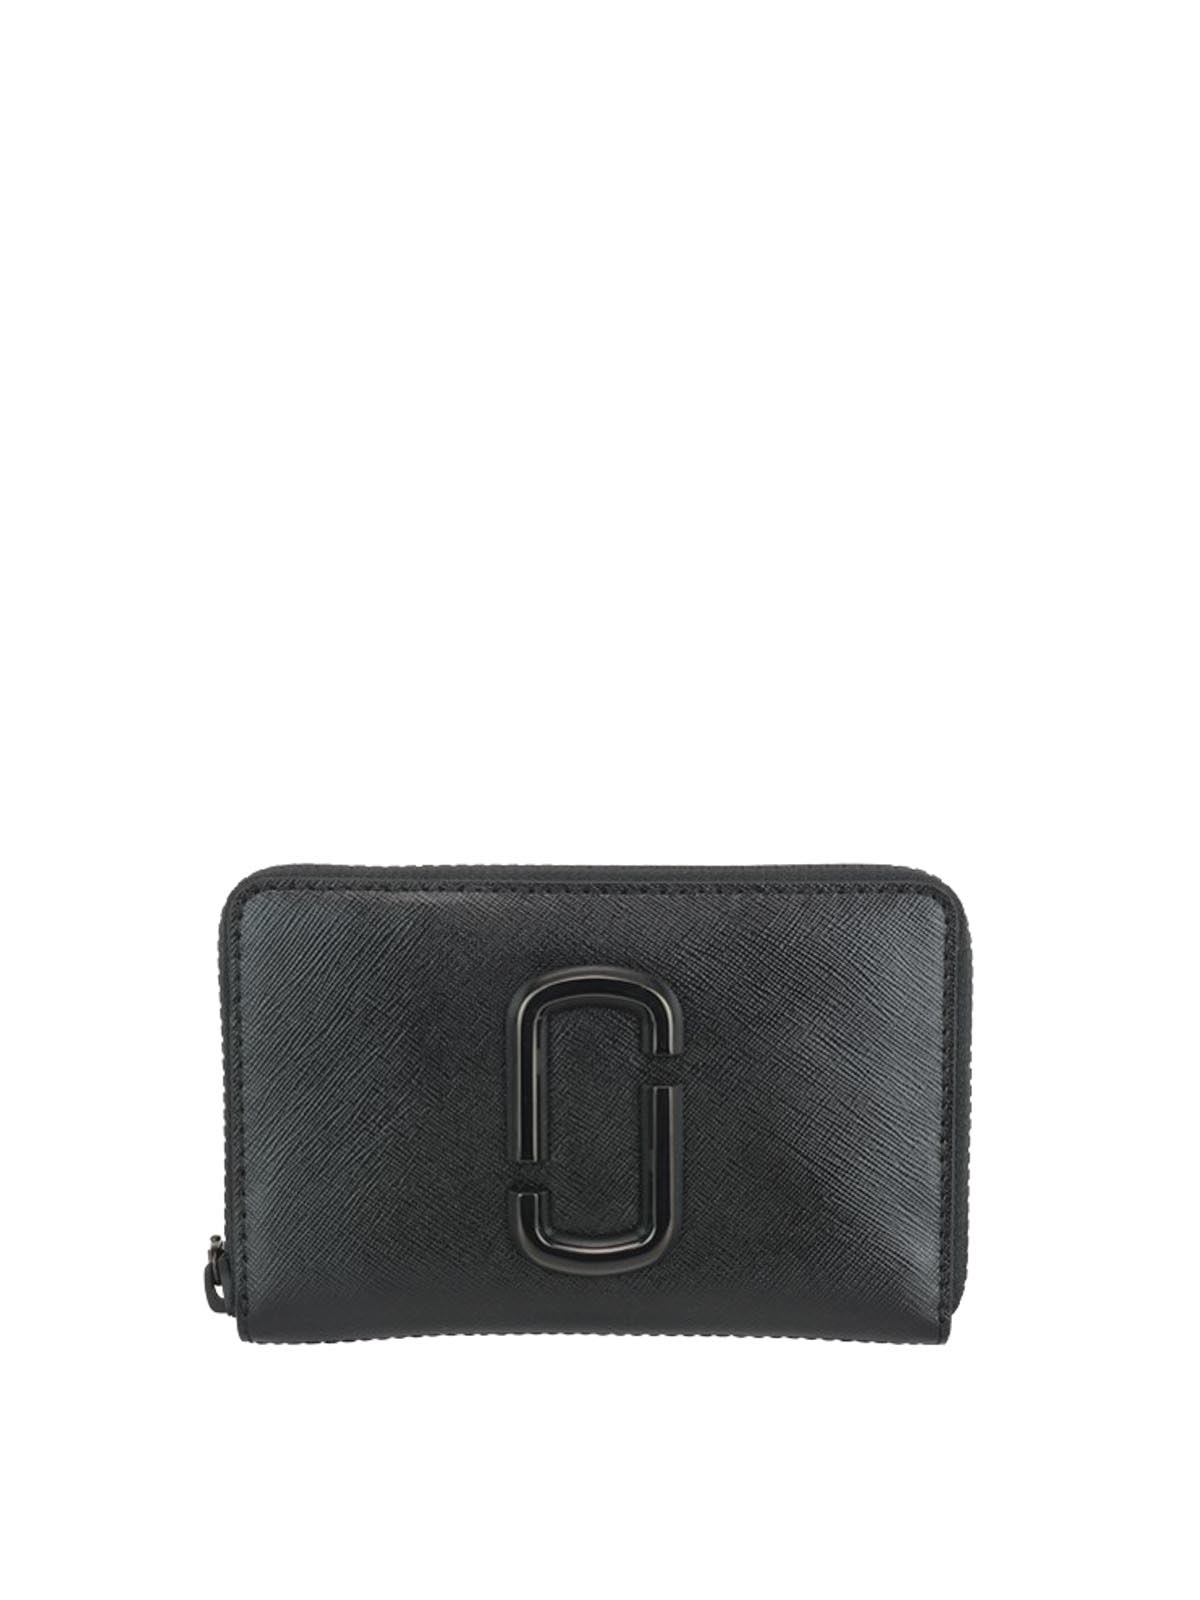 Marc Jacobs Black DTM 'The Snapshot' Compact Wallet